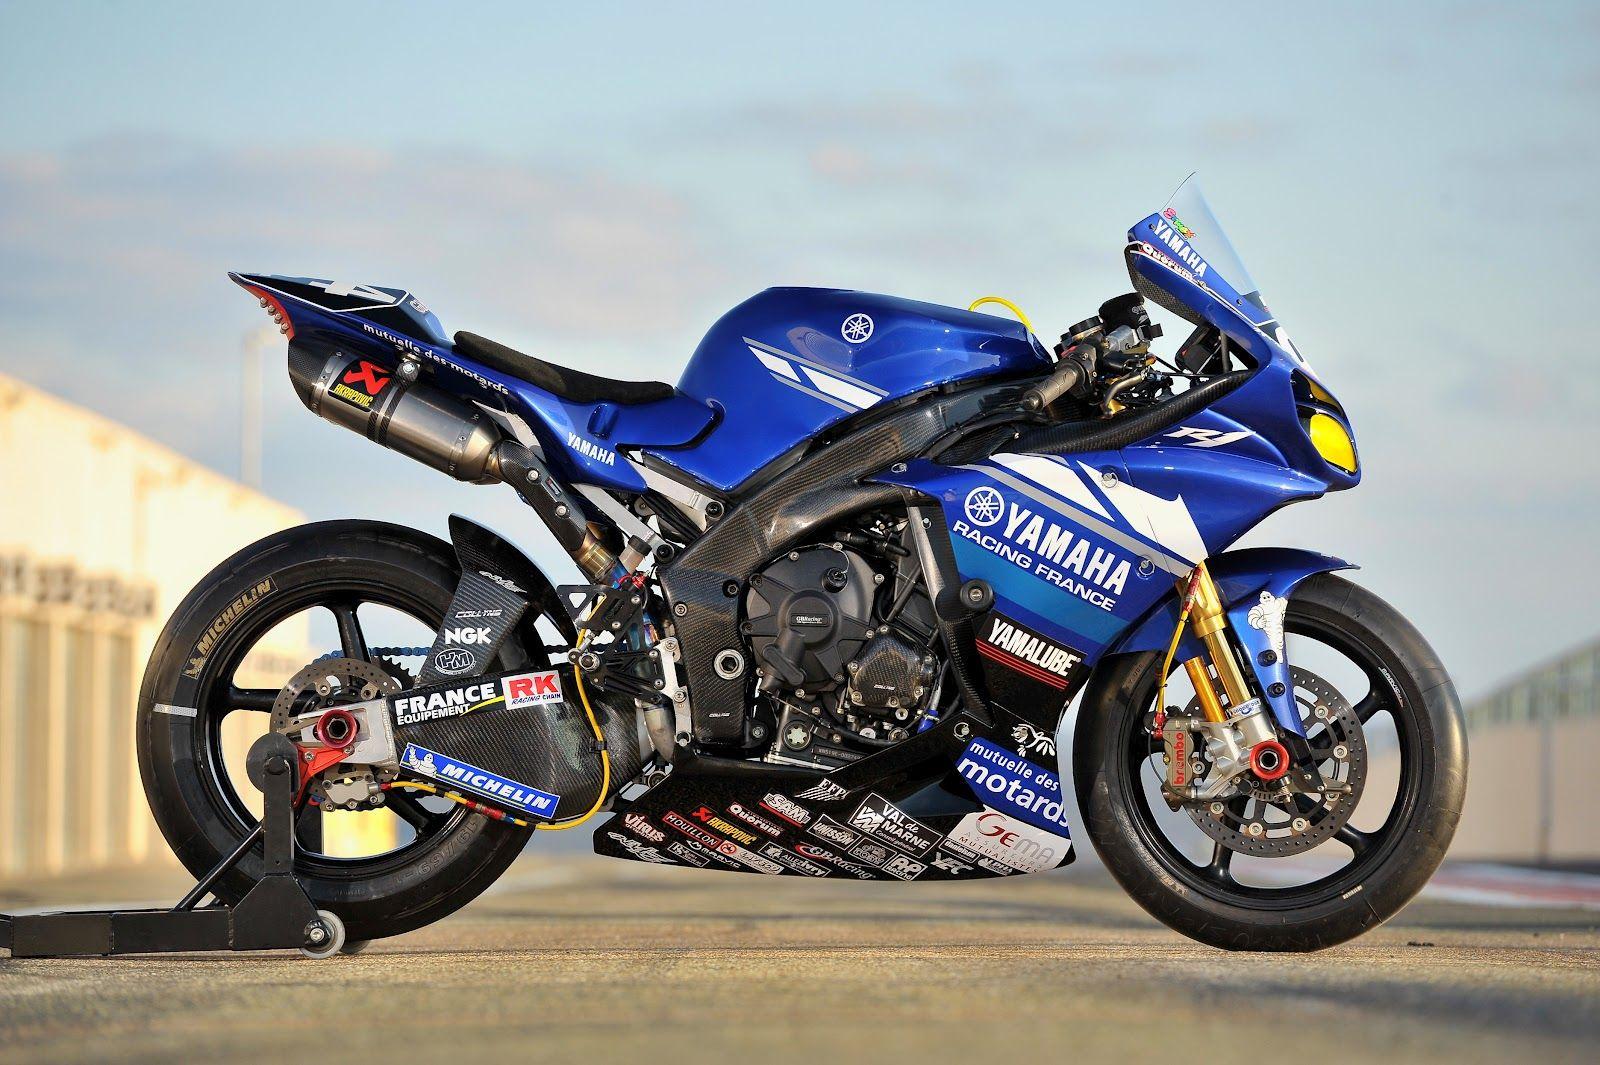 Motorcycles image YAMAHA YZF R1 HD wallpapers and backgrounds photos